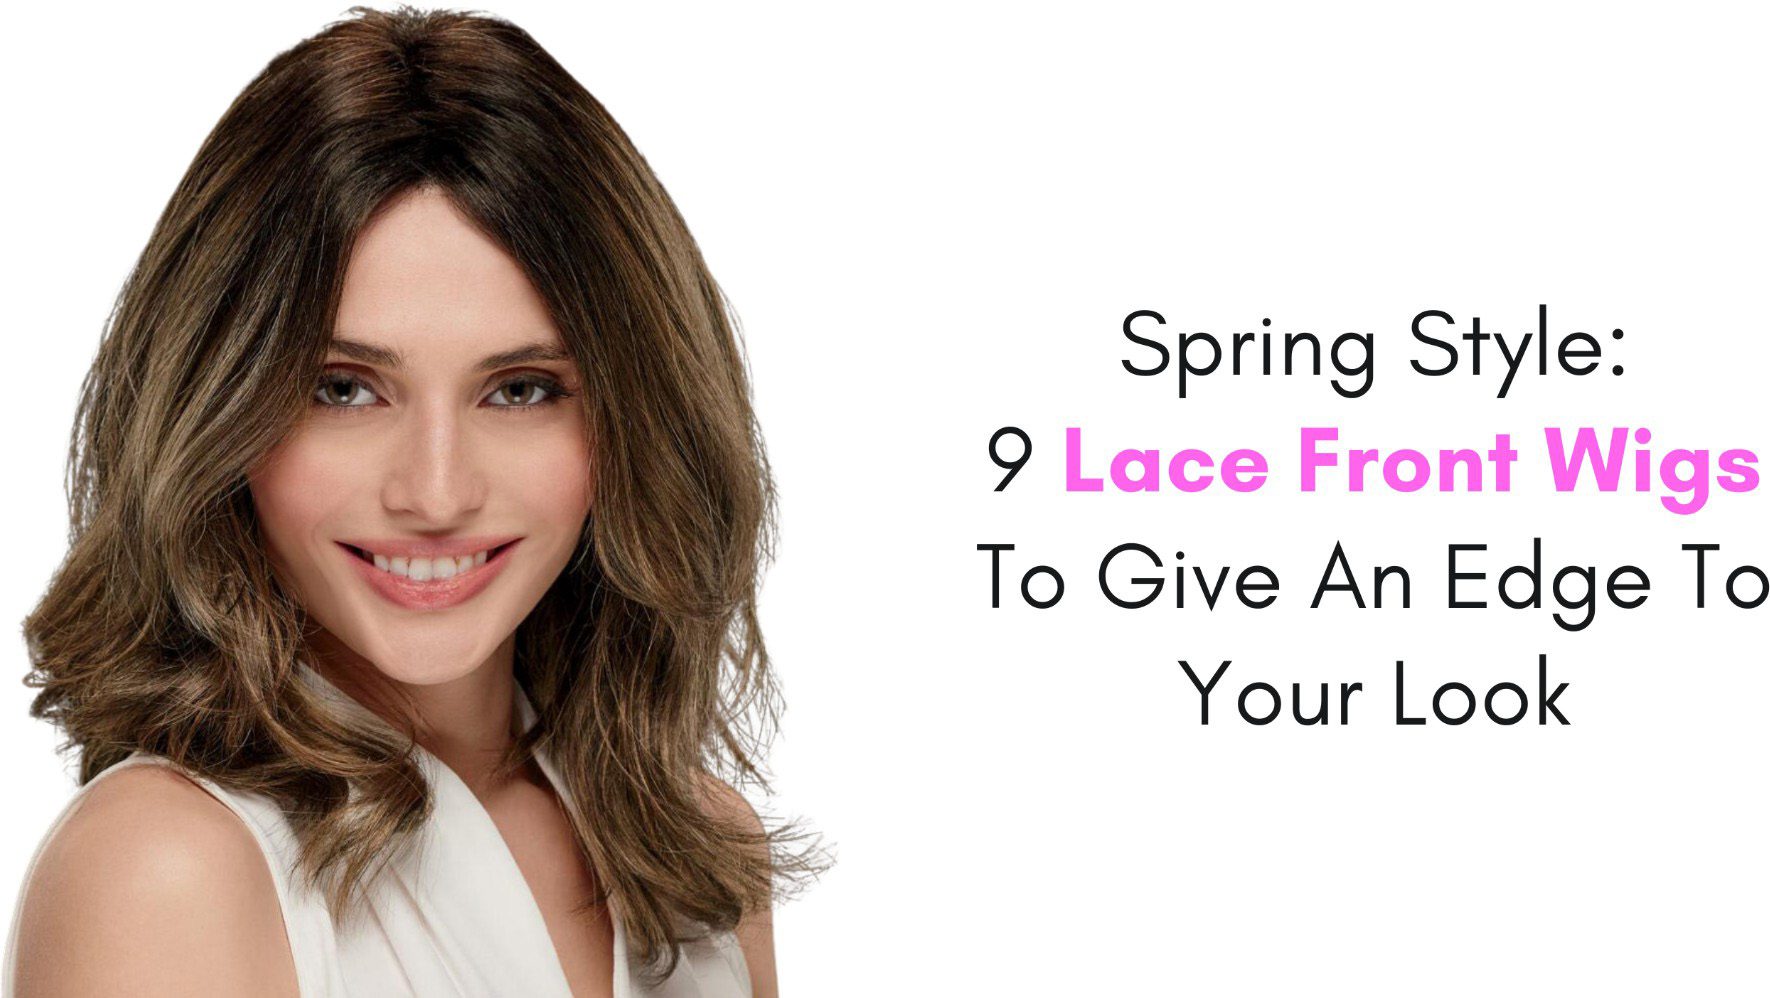 Spring Style: 9 Lace Front Wigs To Give An Edge To Your Look